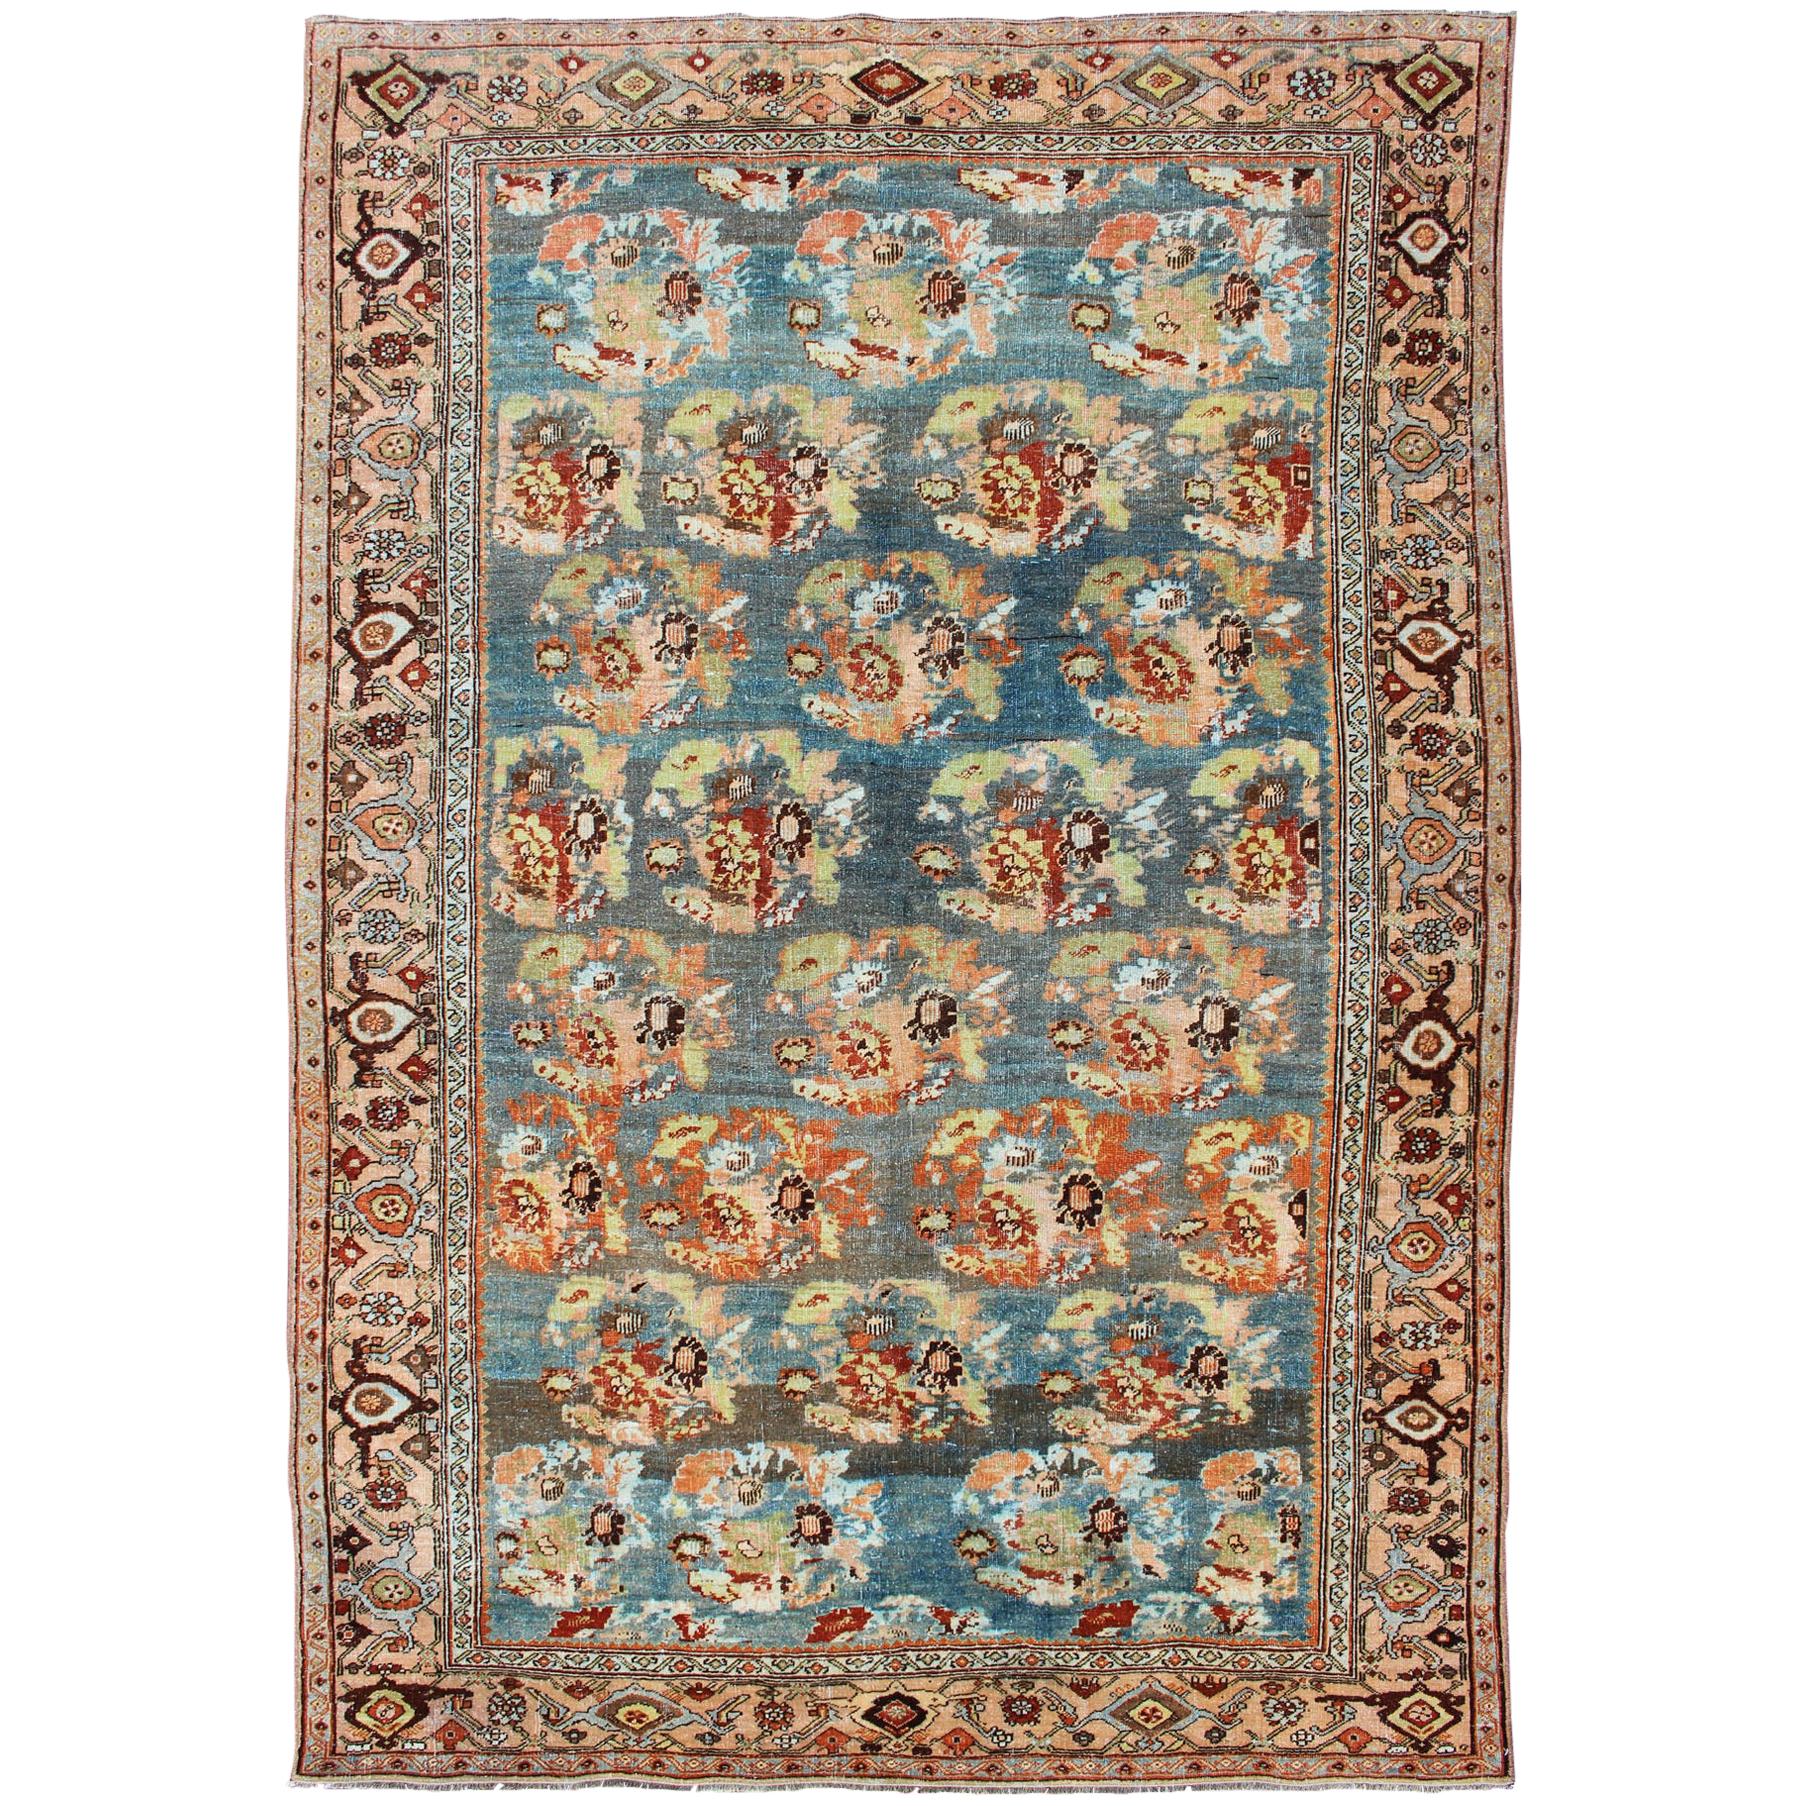 Antique Persian Bidjar Rug with Blossoming Floral Design in Blue and Red